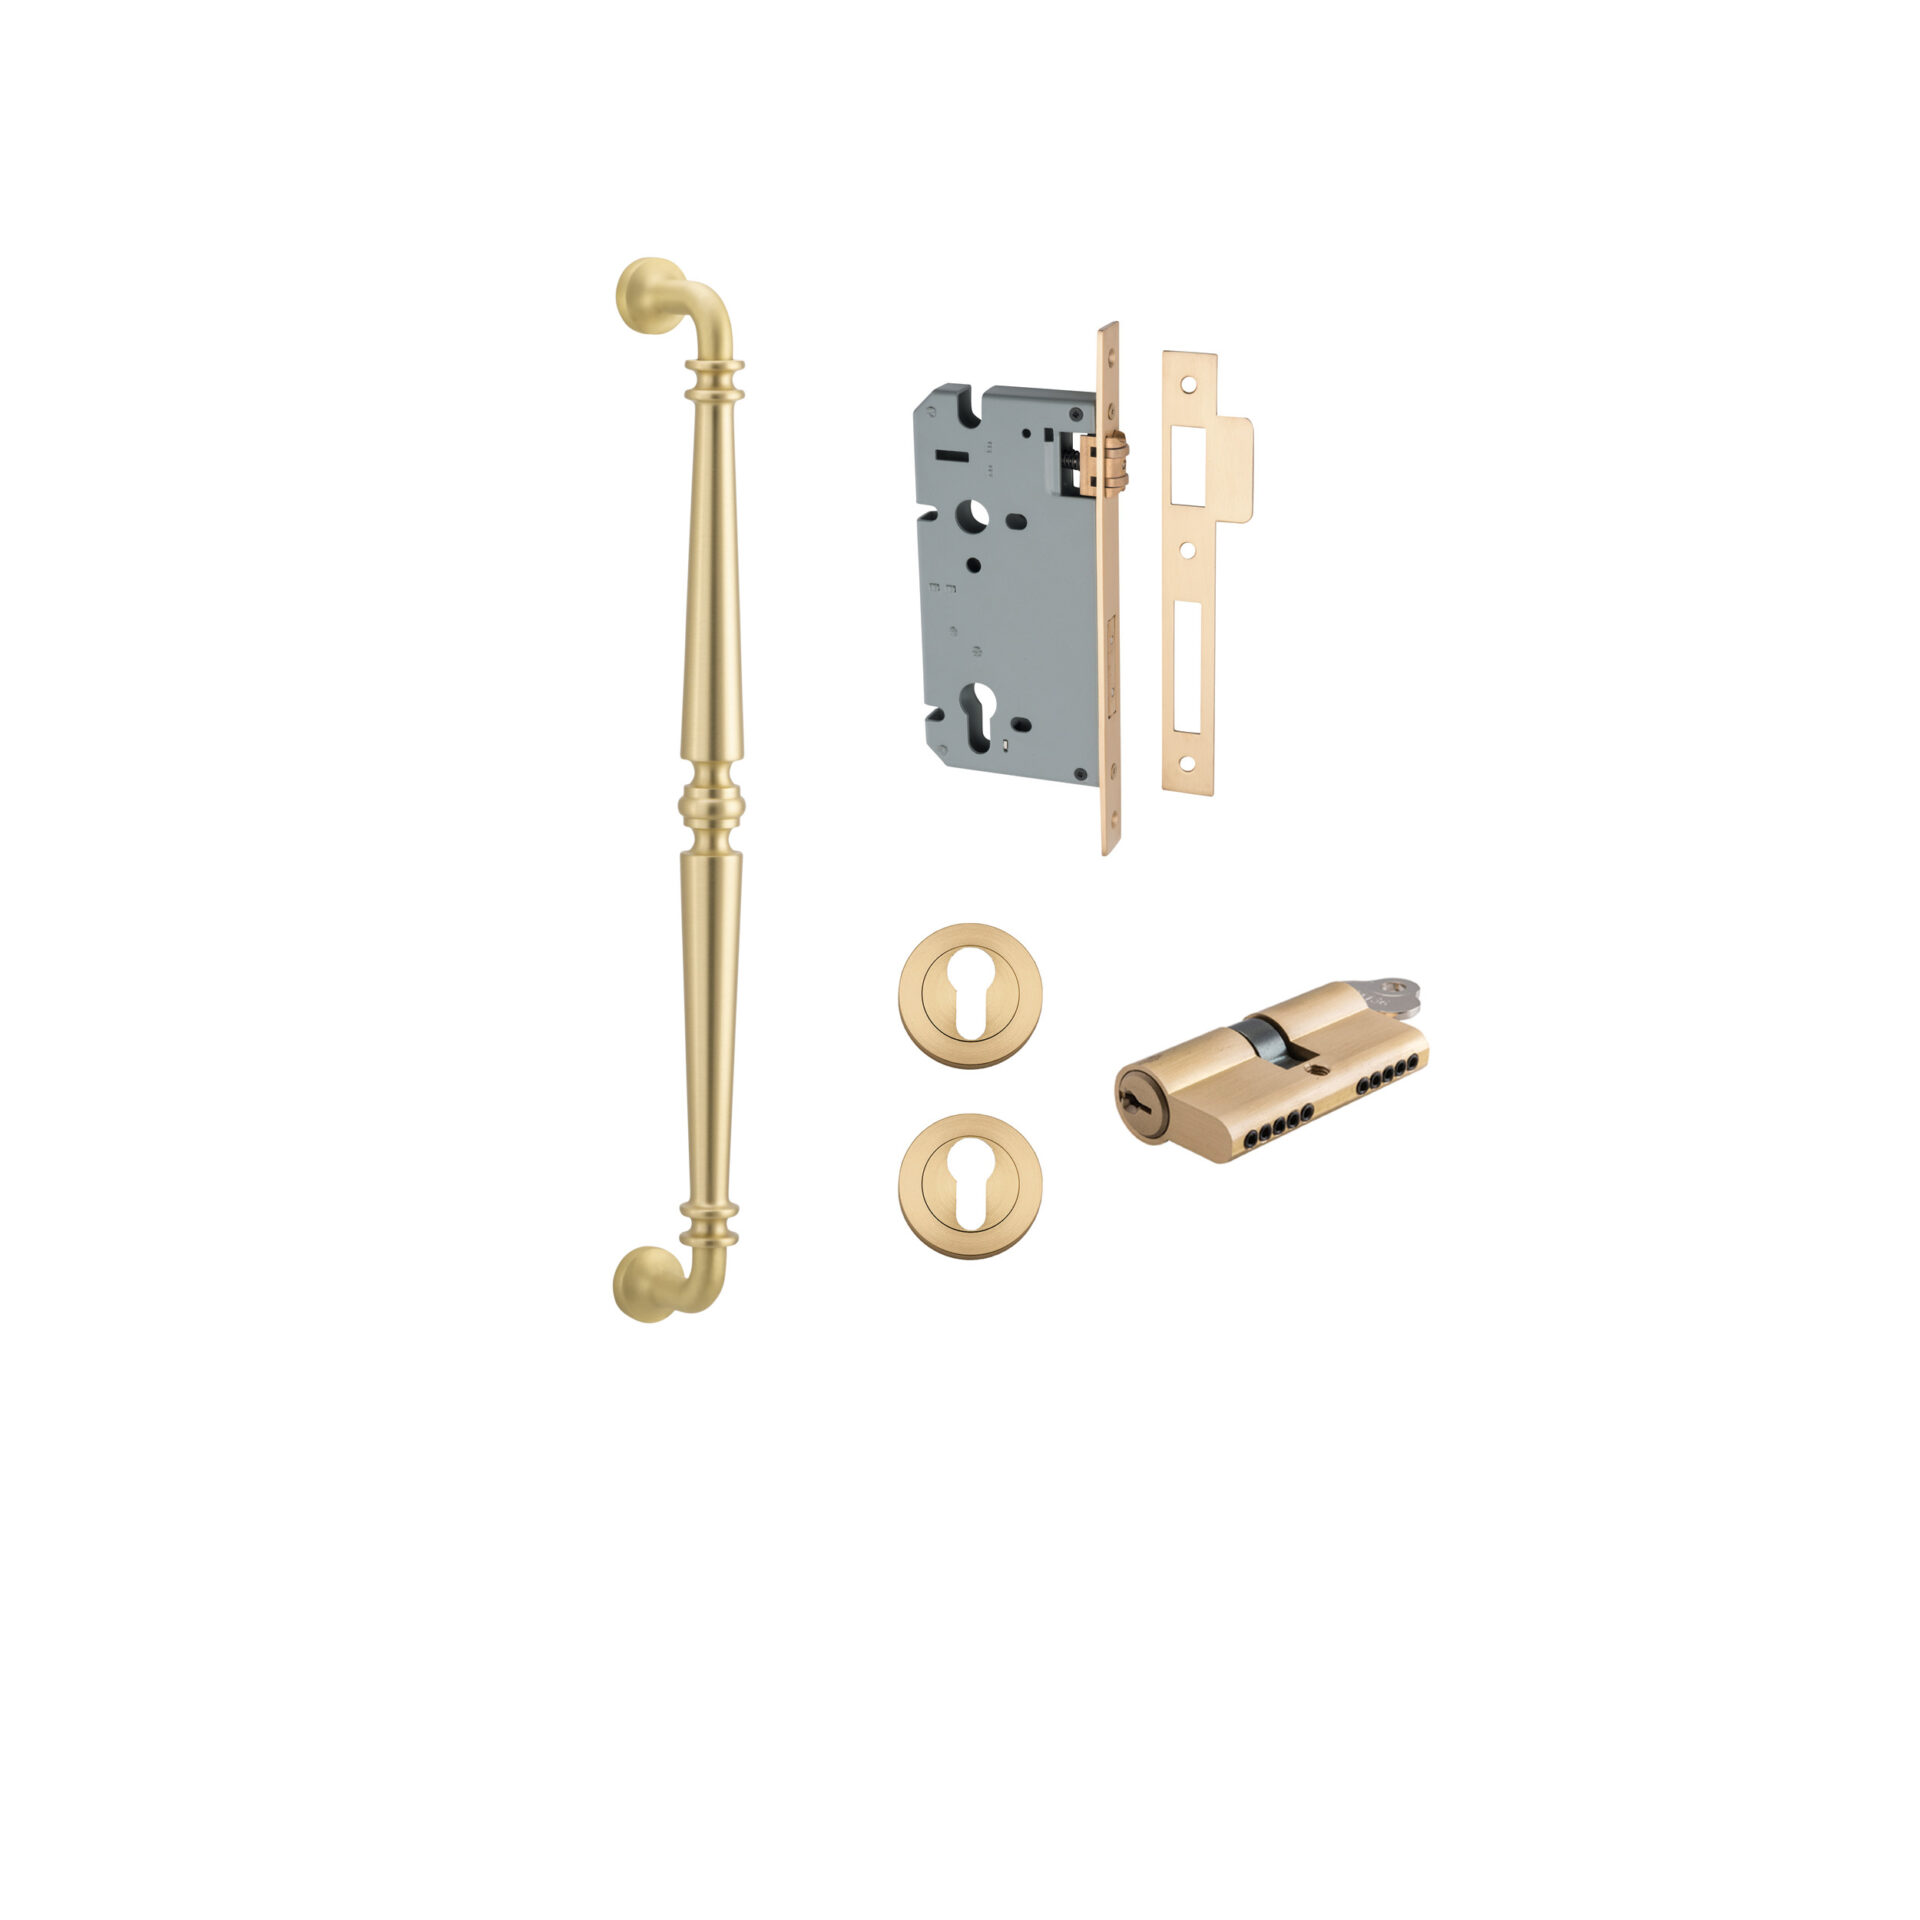 17101KENTR60KK - Sarlat Pull Handle - 450mm Entrance Kit with Separate High Security Lock - Brushed Gold PVD - Entrance